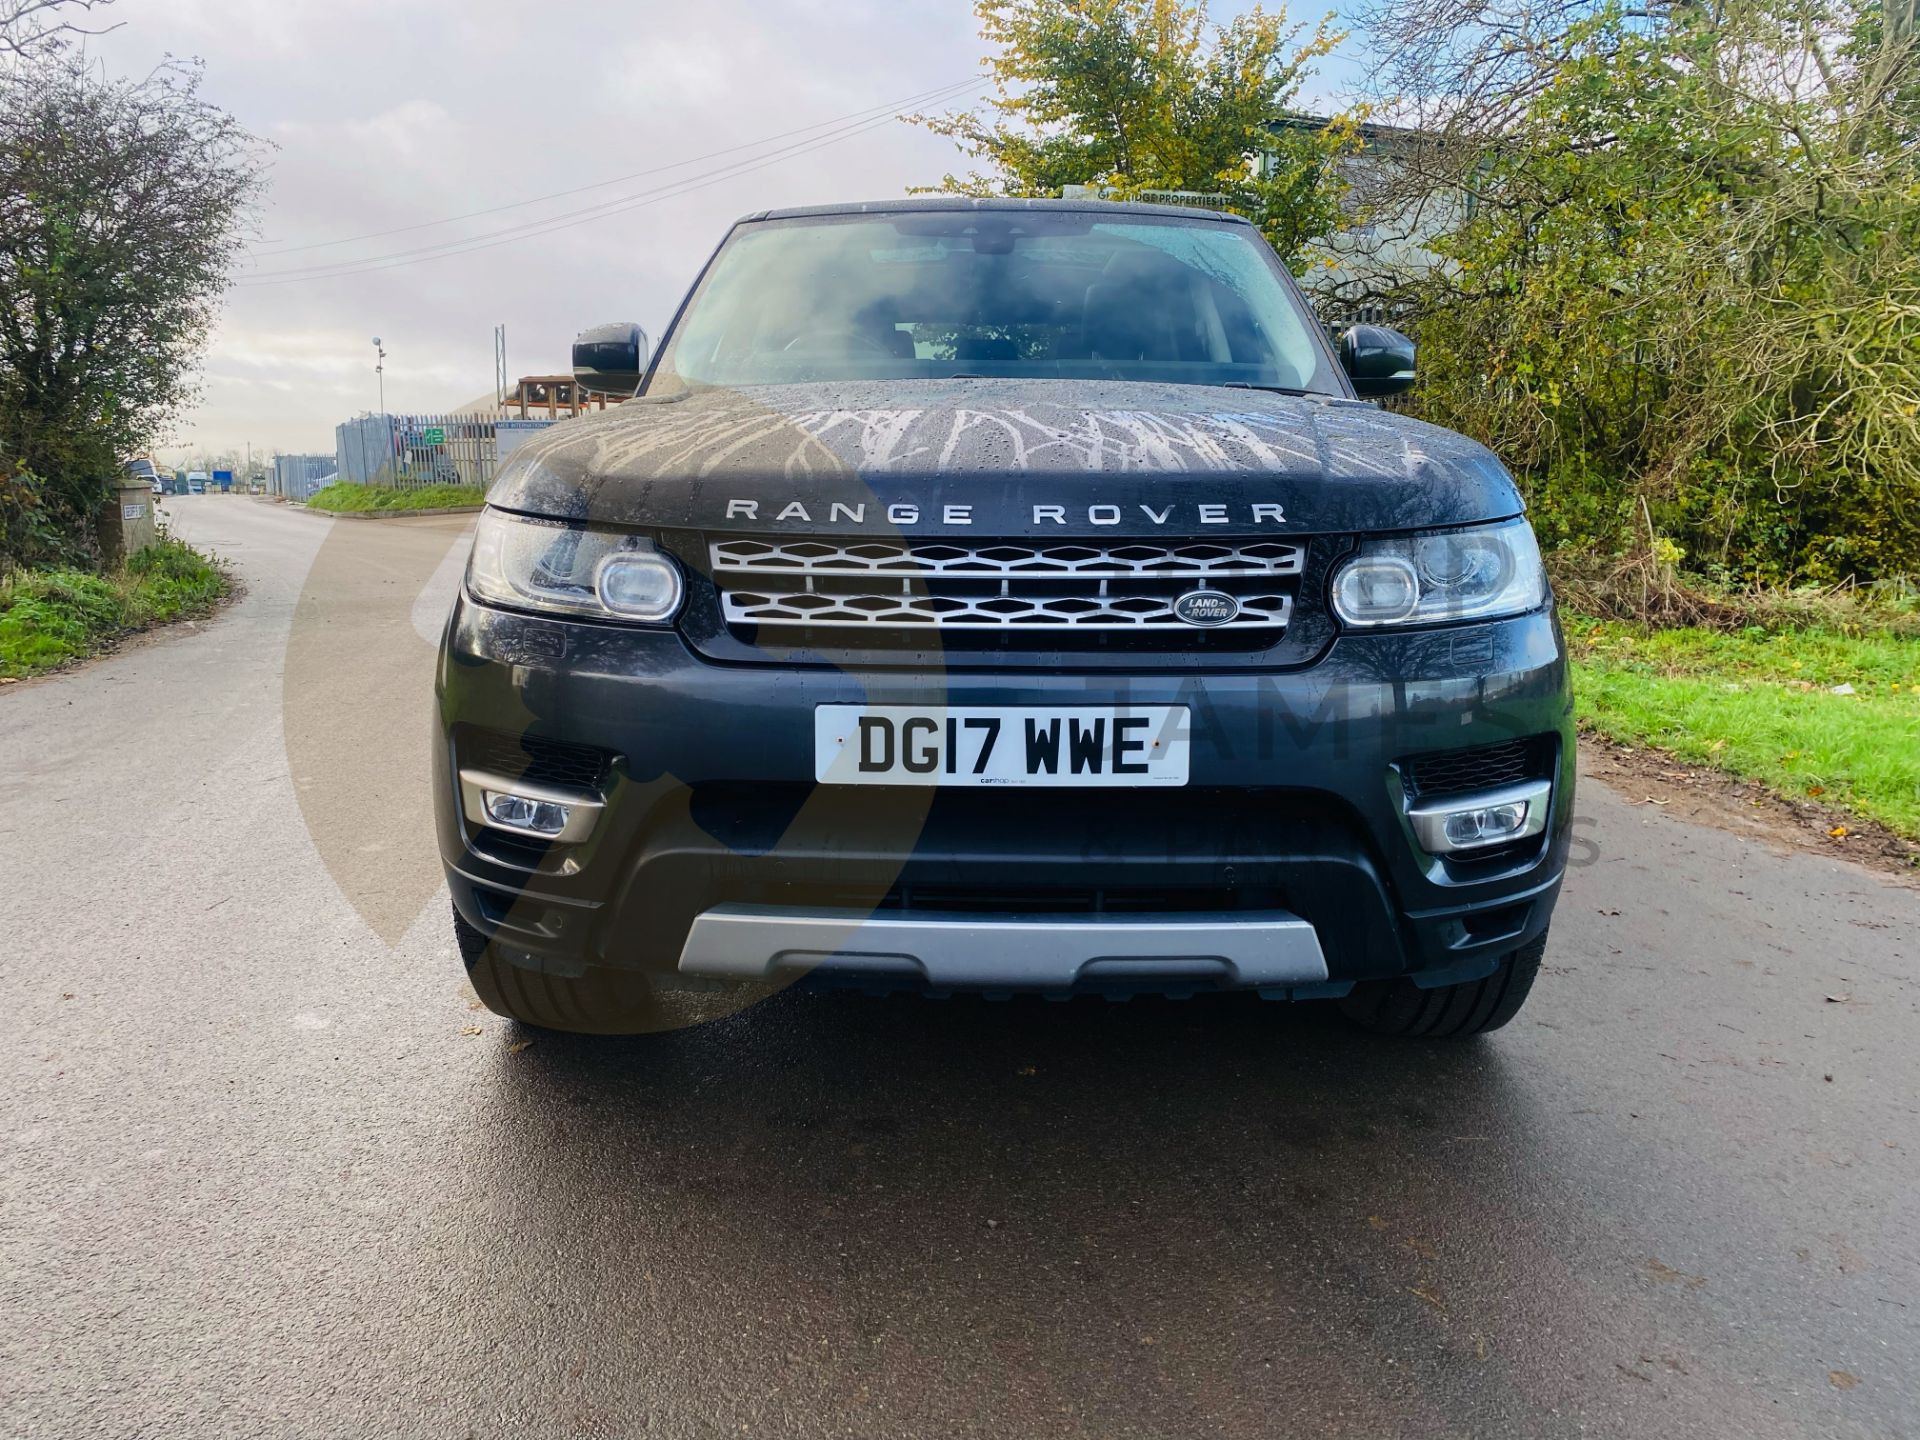 (ON SALE) RANGE ROVER SPORT "HSE" AUTO (NEW SHAPE) 17 REG - LEATHER - PANORAMIC ROOF - SAT NAV - - Image 4 of 47